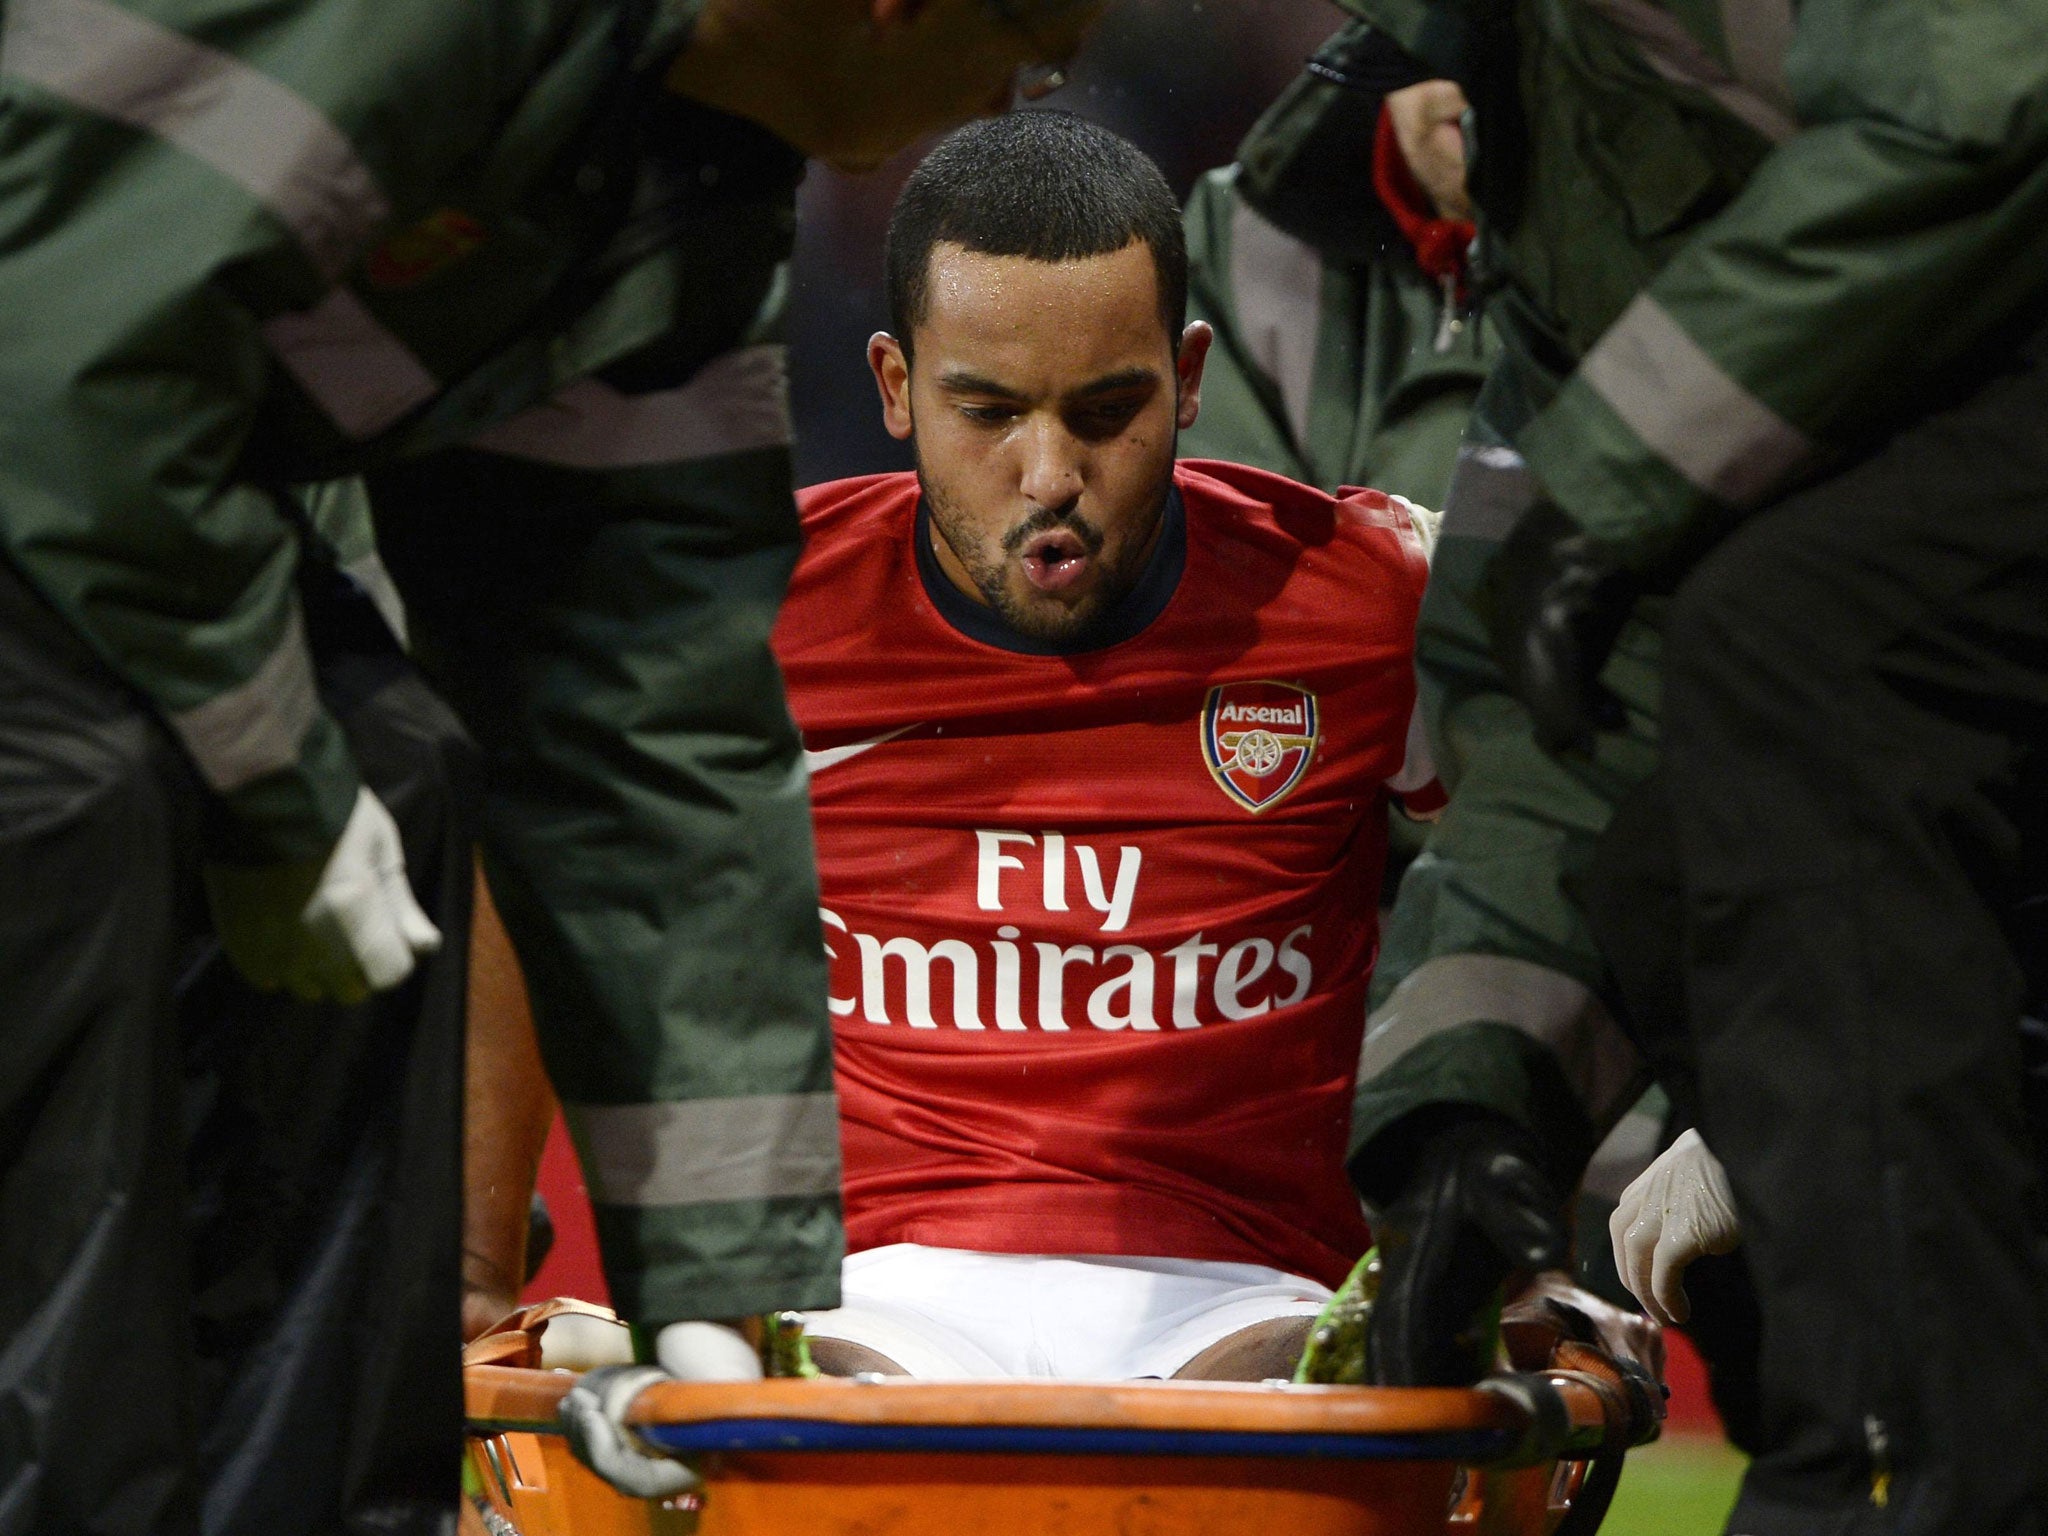 Theo Walcott is stretchered off the pitch during the match against Tottenham Hotspur